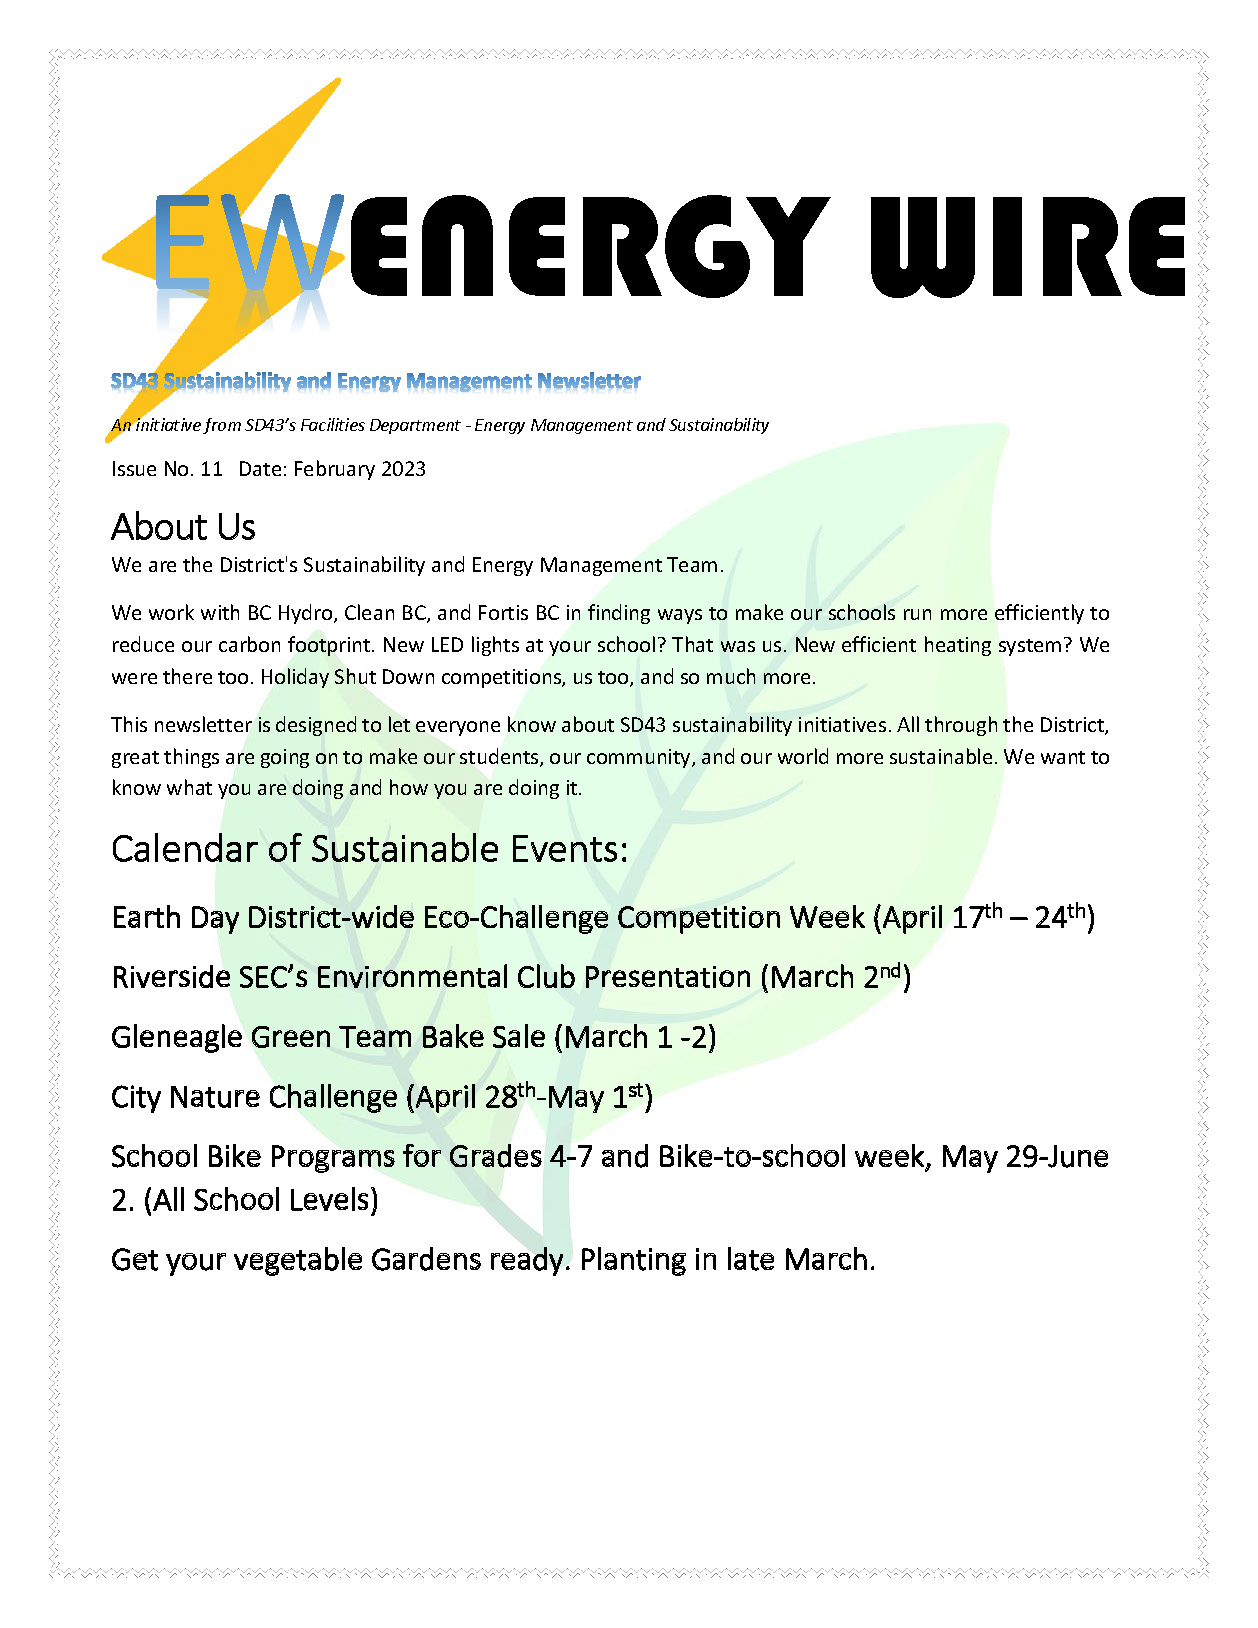 Energy Wire Newsletter Feb 2023_Page_1.jpg